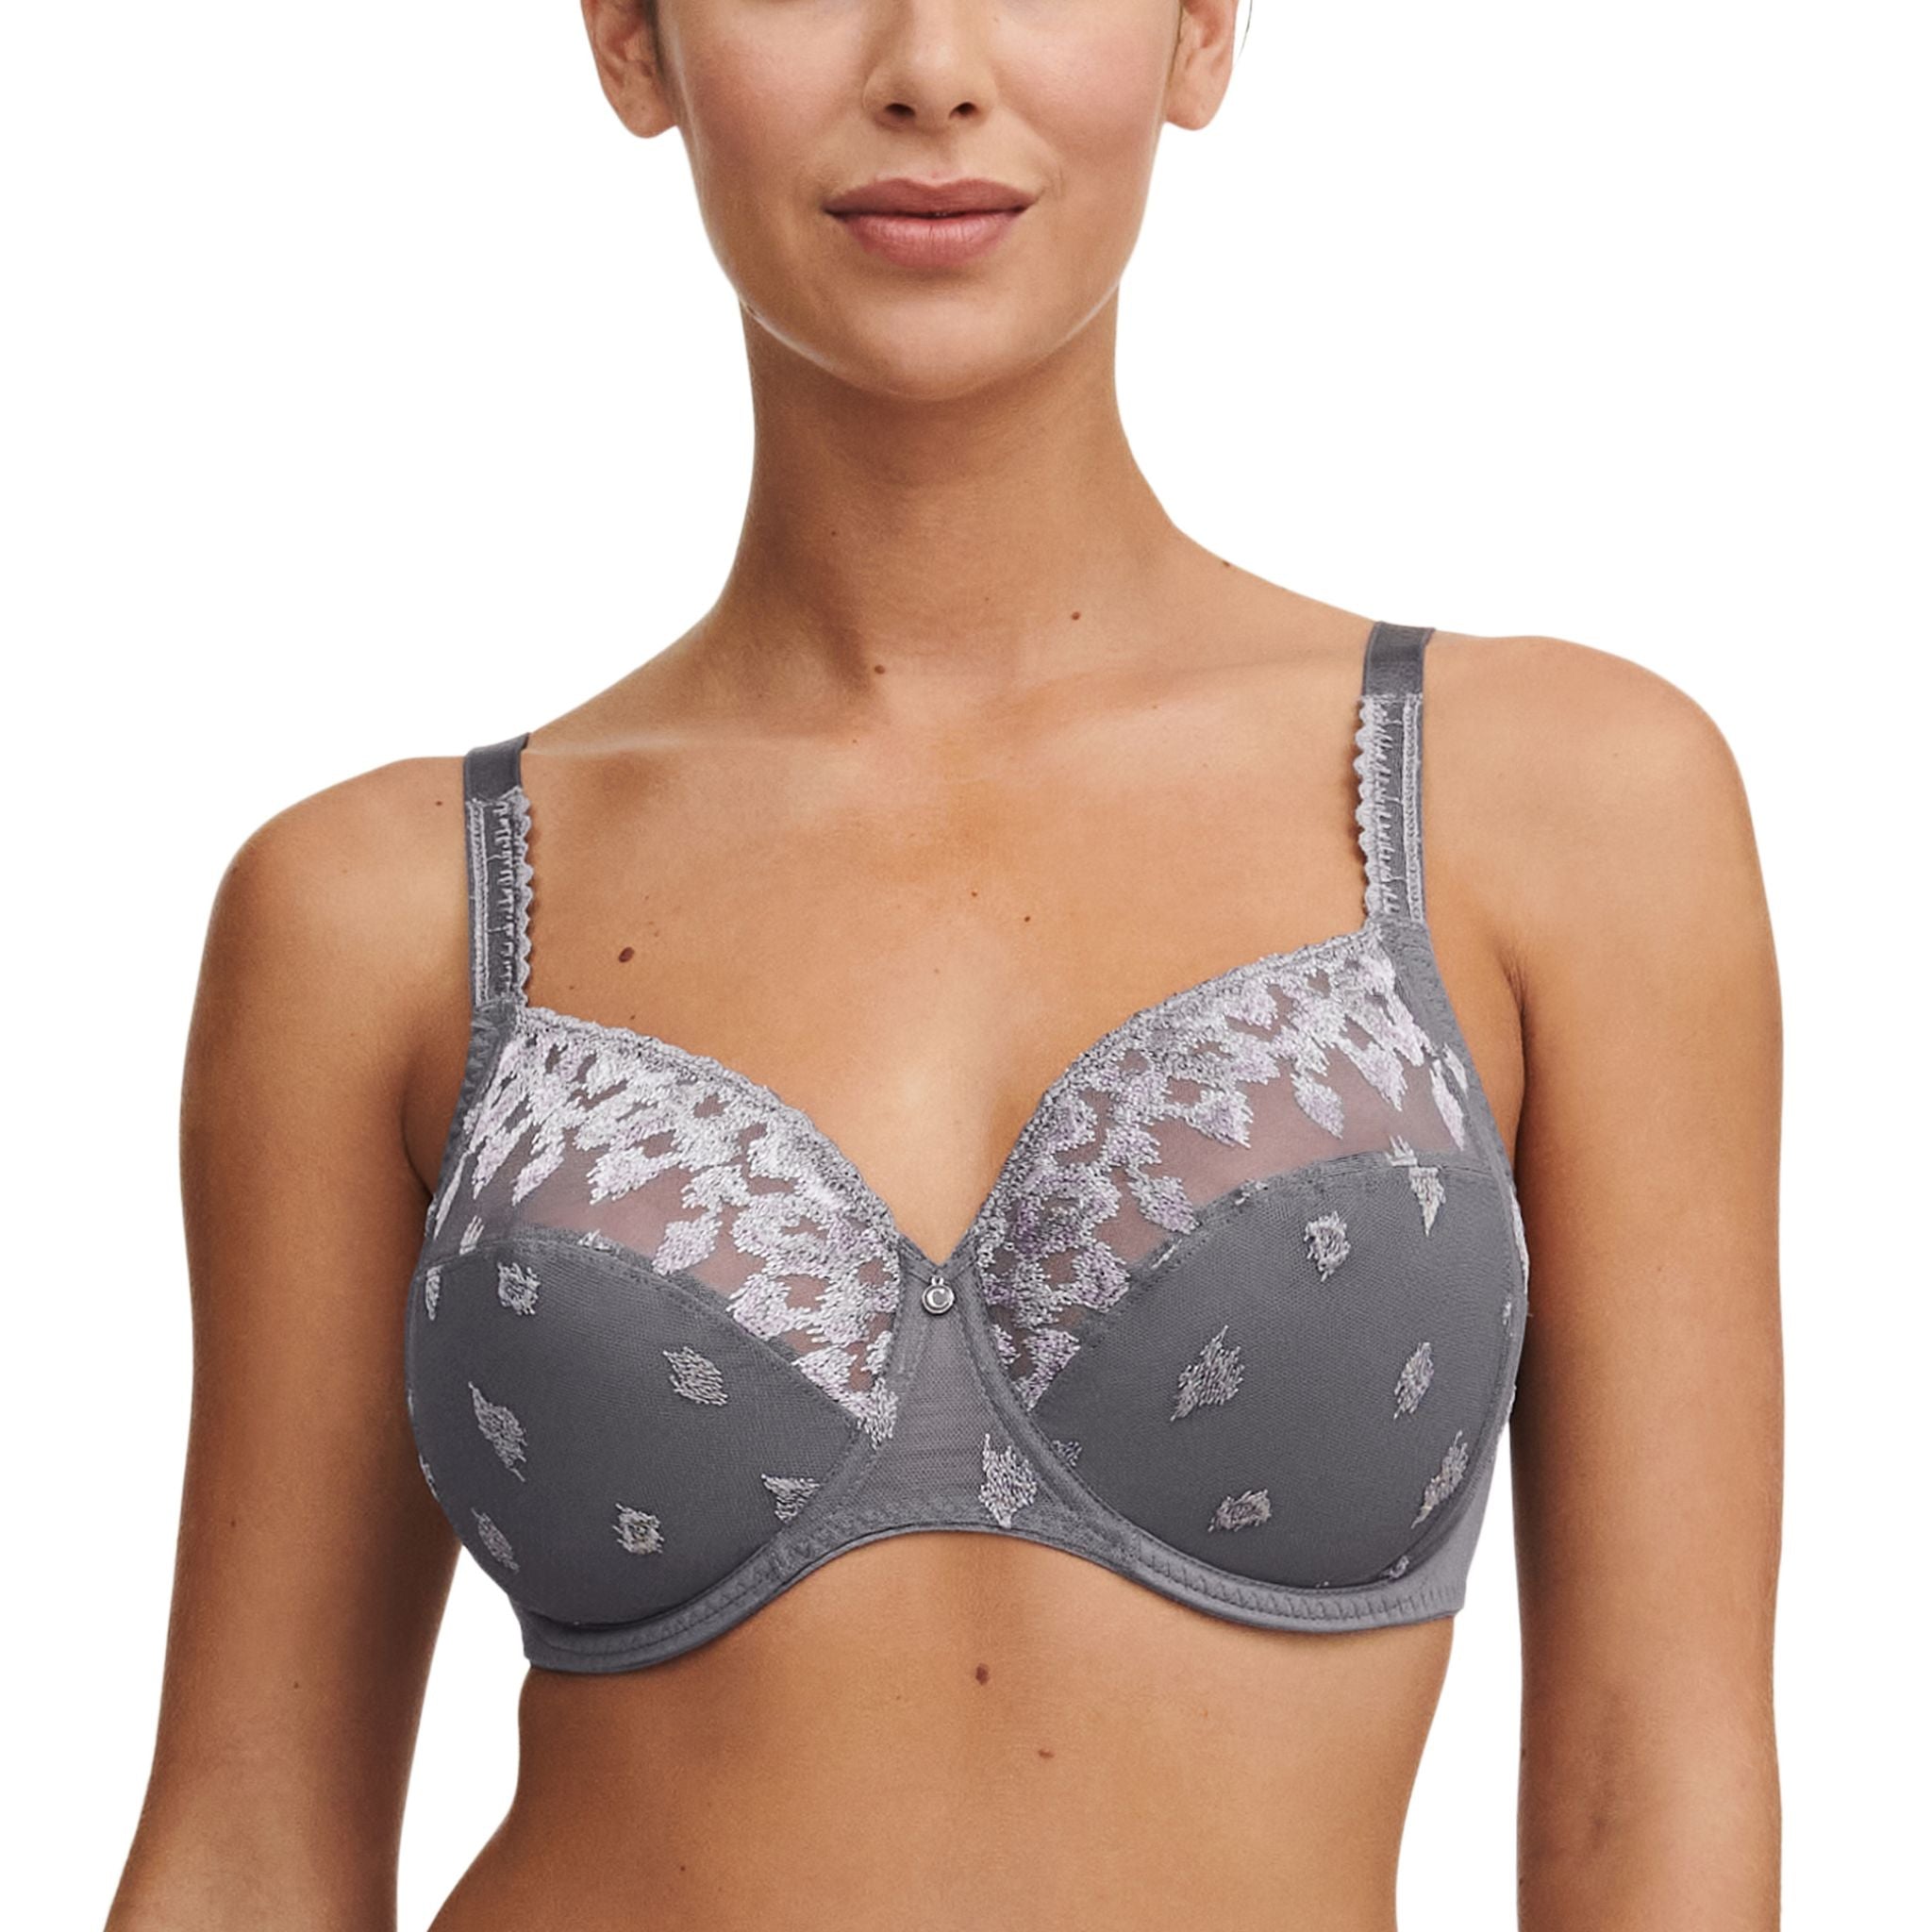 The Bold Curve Full Coverage Unlined Bra is a fit you can count on. The light embroidery with subtle details reminiscent of an animal print offers a light look and feel. With a reassuring coverage and a centering effect, you don't have to compromise style for a full bust support.